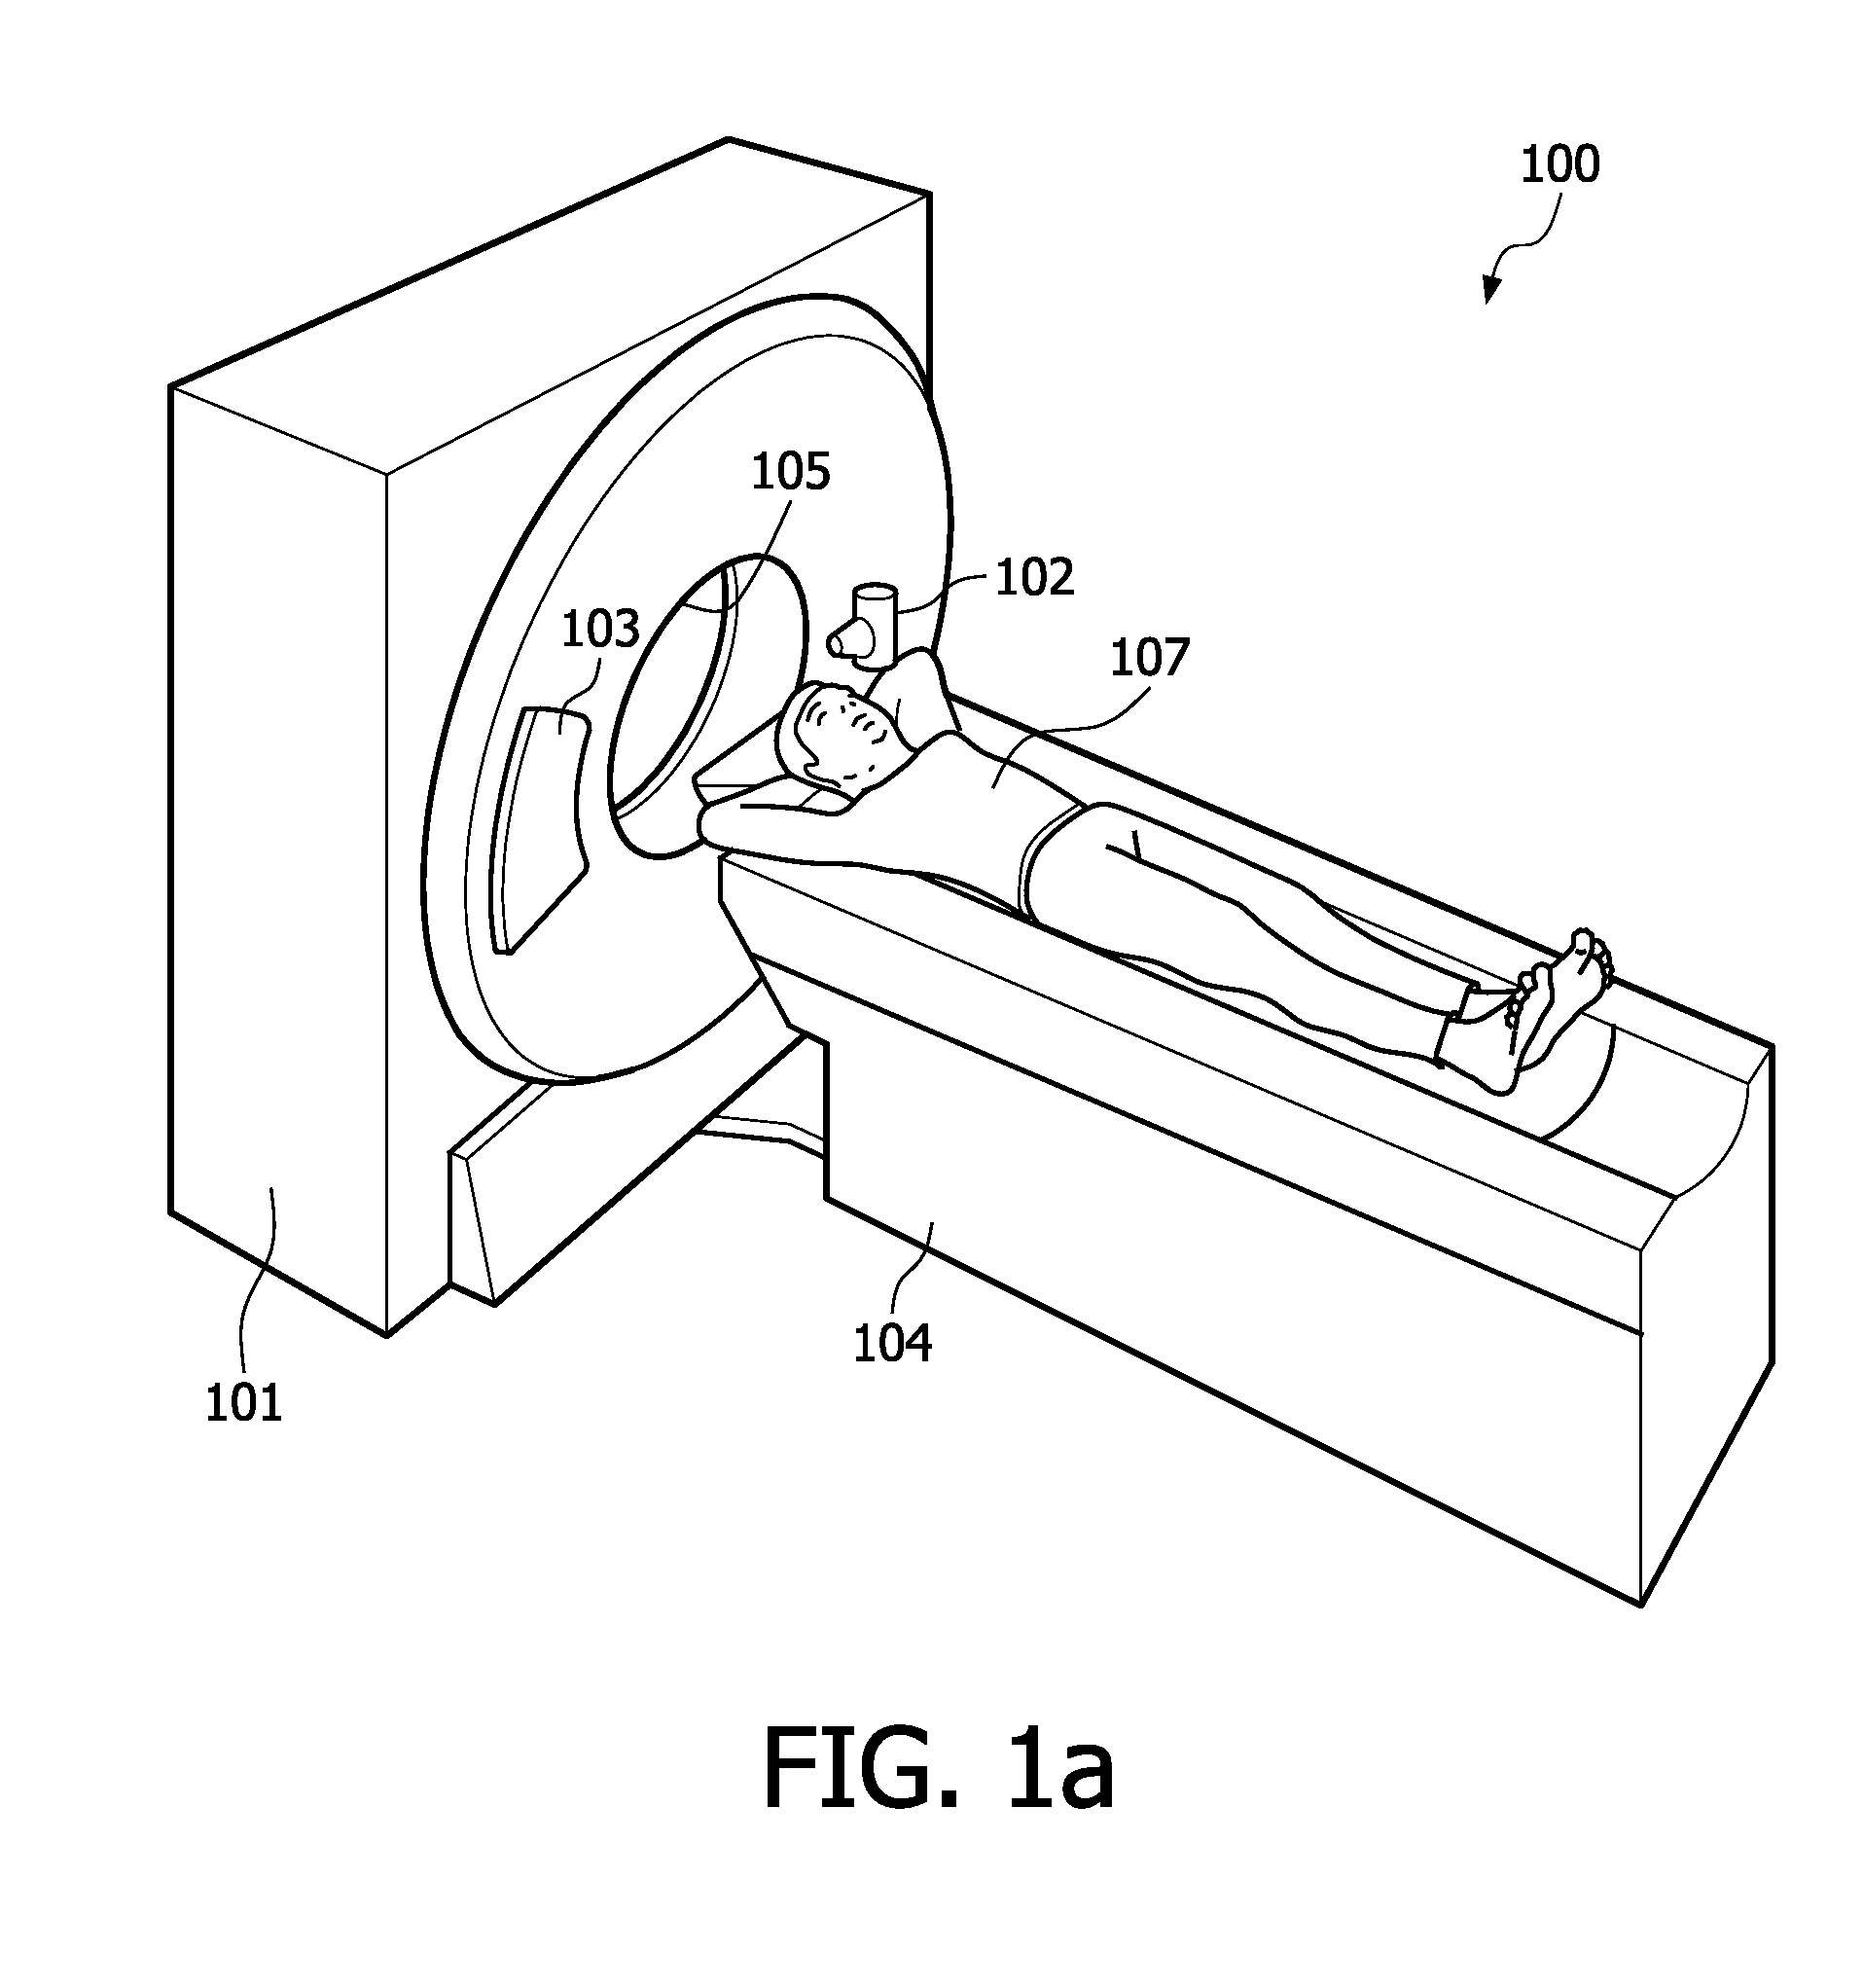 X-ray system with efficient anode heat dissipation